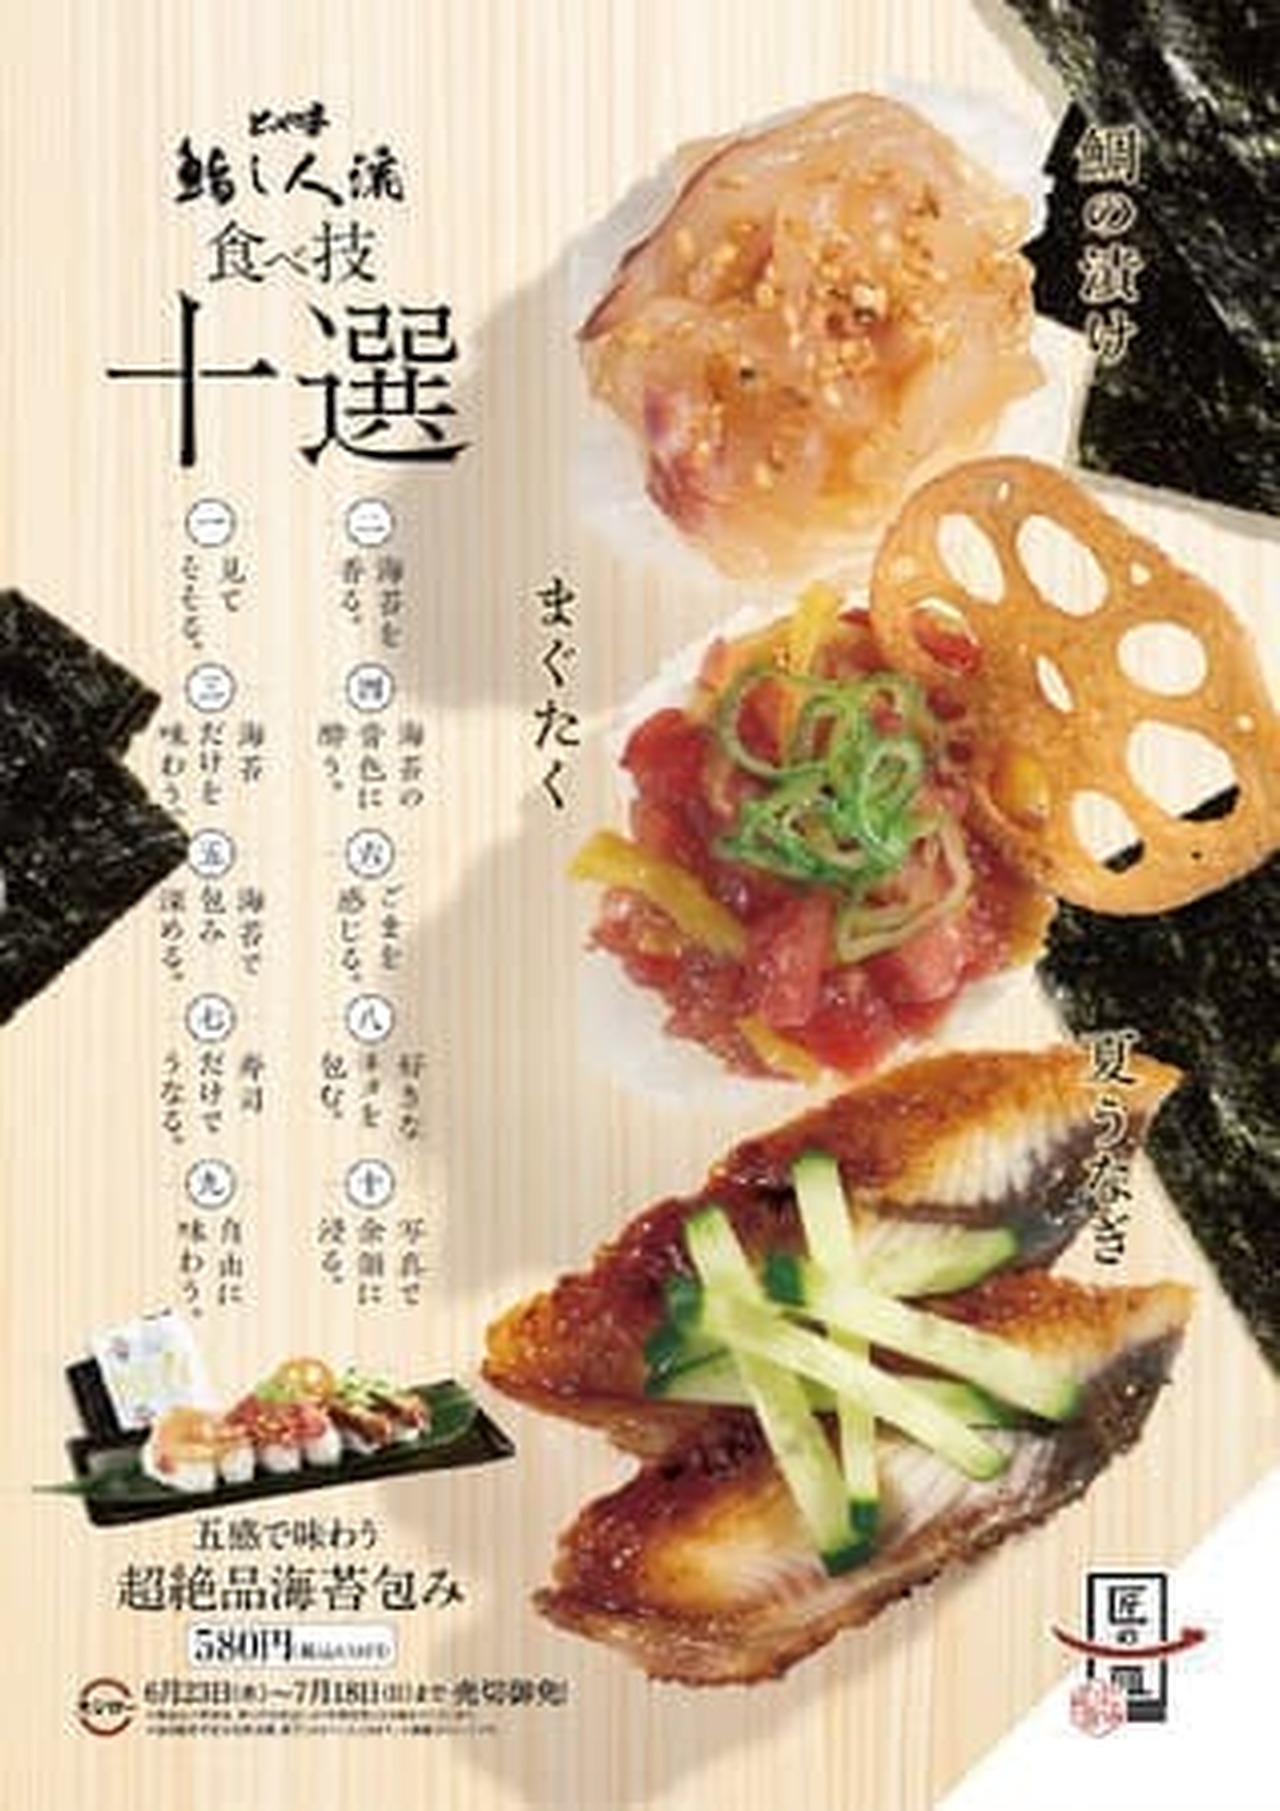 Sushiro "A superb seaweed wrap that you can enjoy with all five senses"